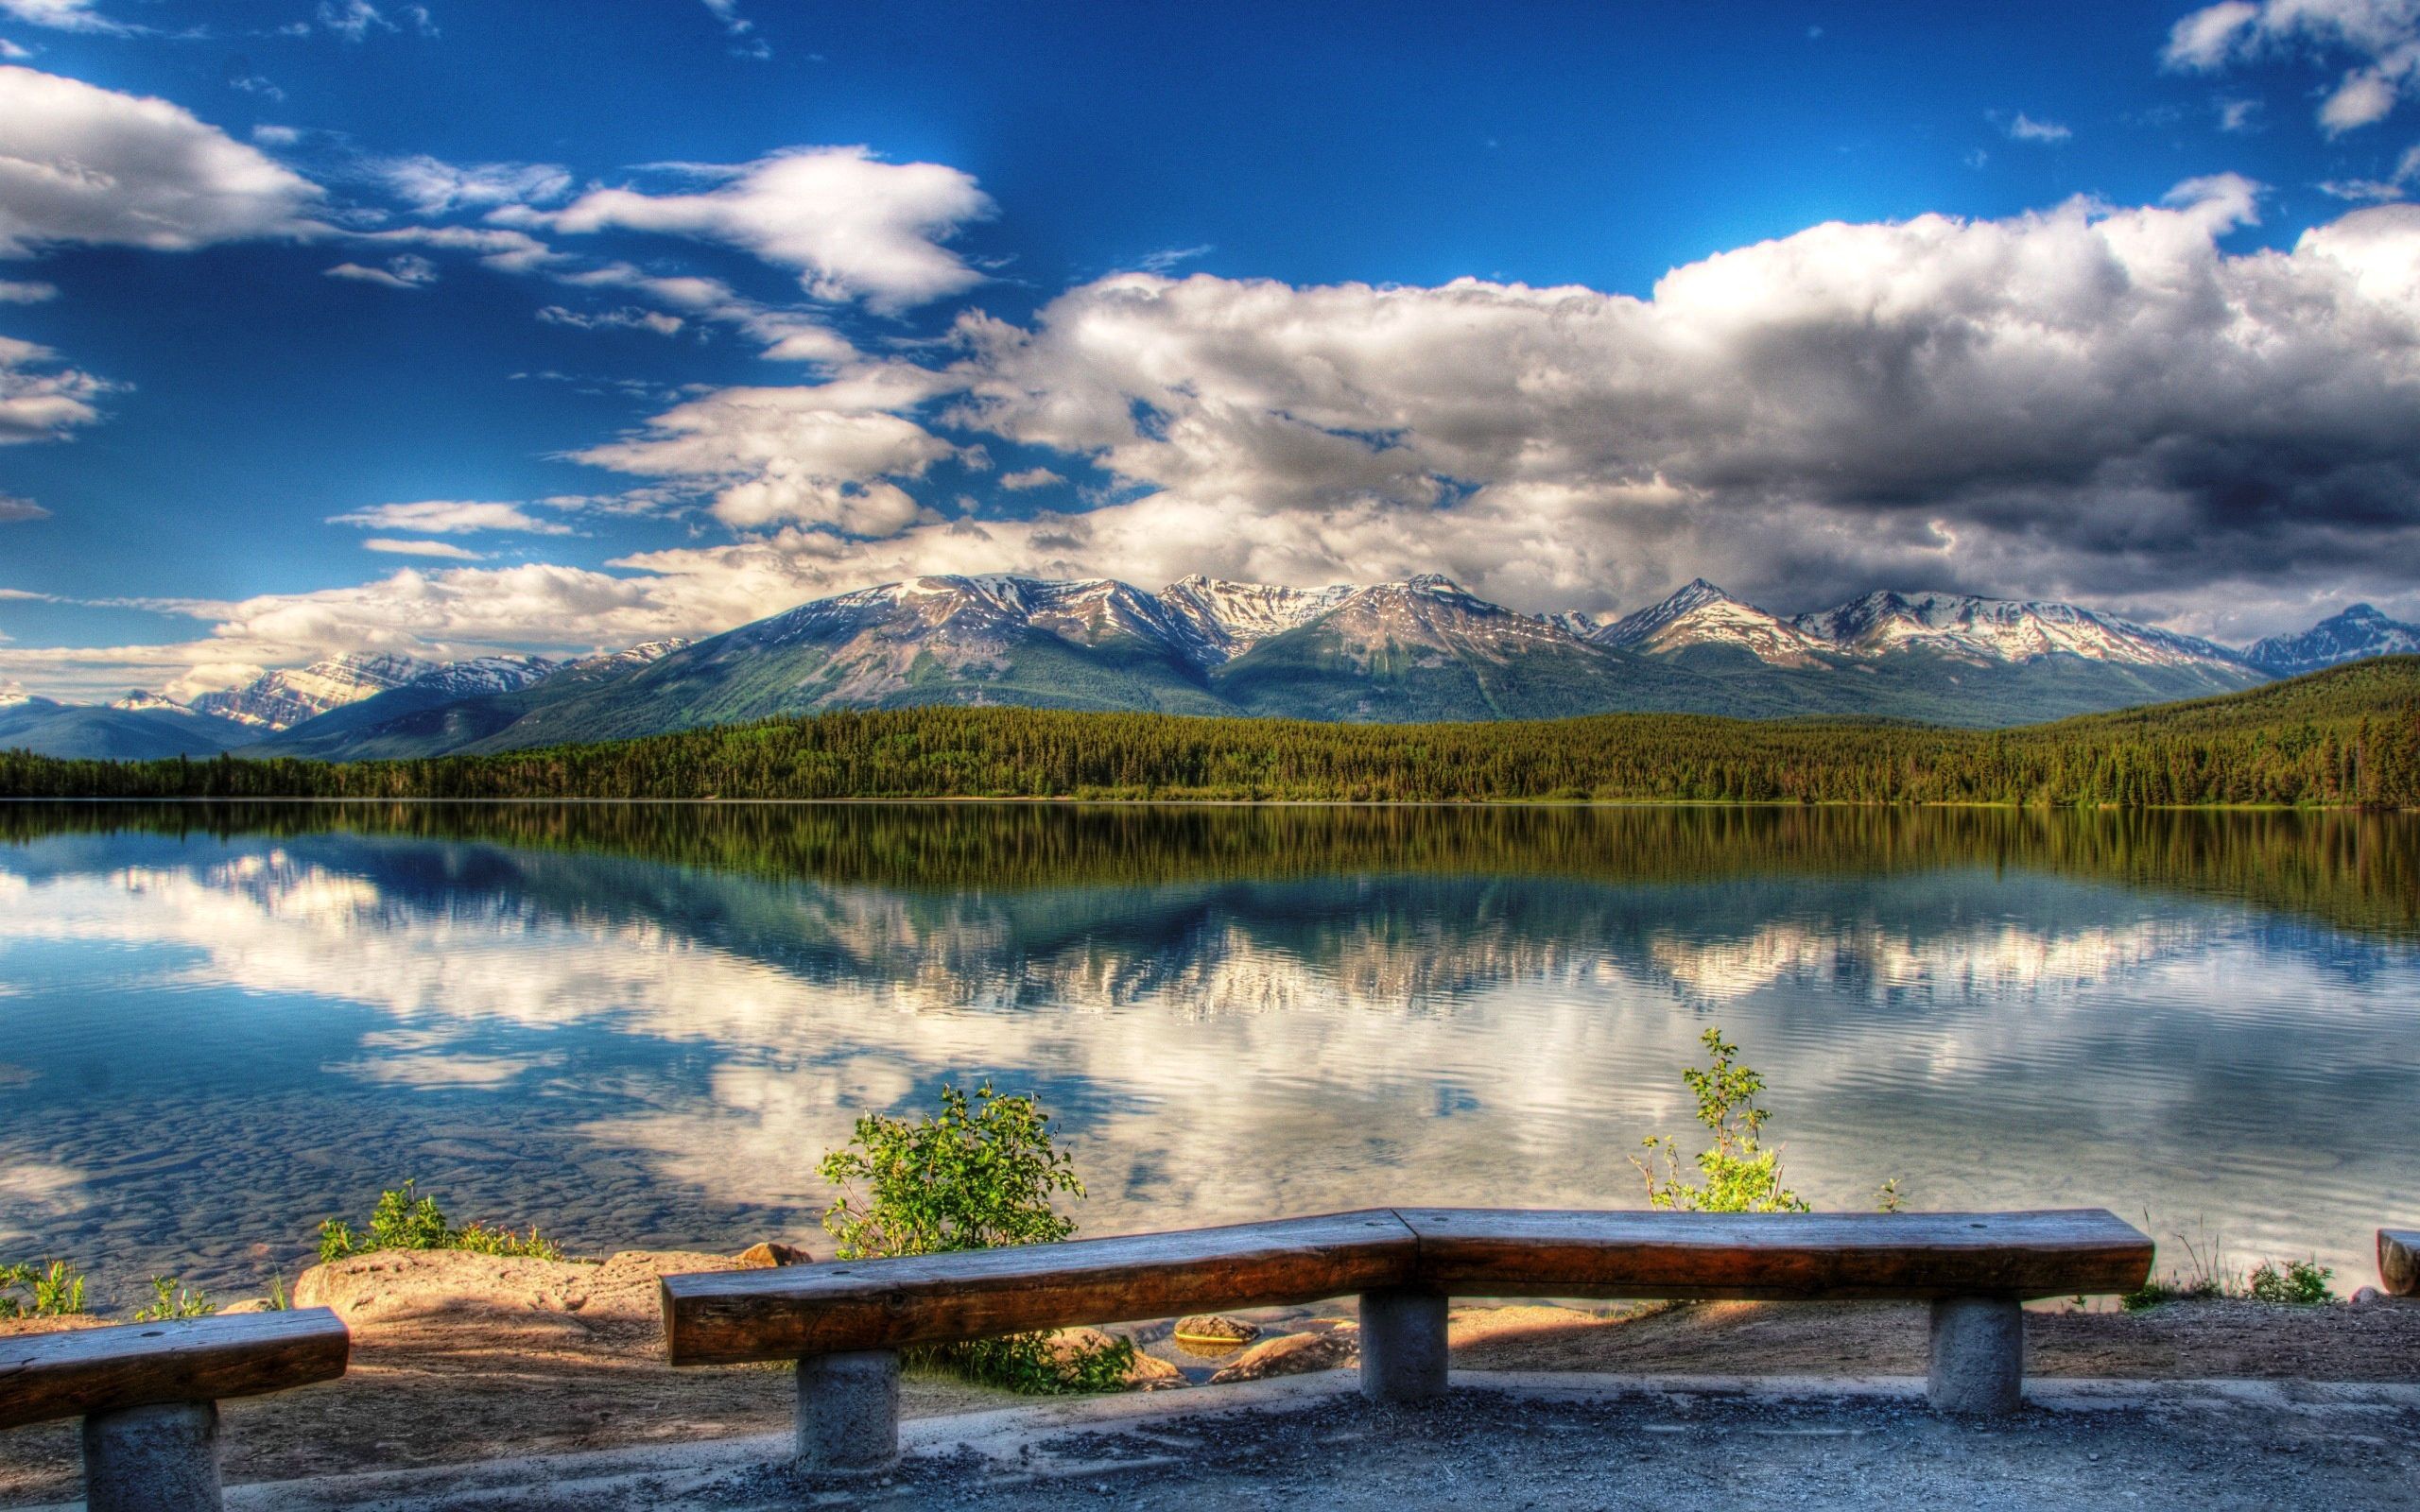 clear, landscape, nature, sky, mountains, clouds, lake, reflection, shore, bank, day, benches, i see, picturesque